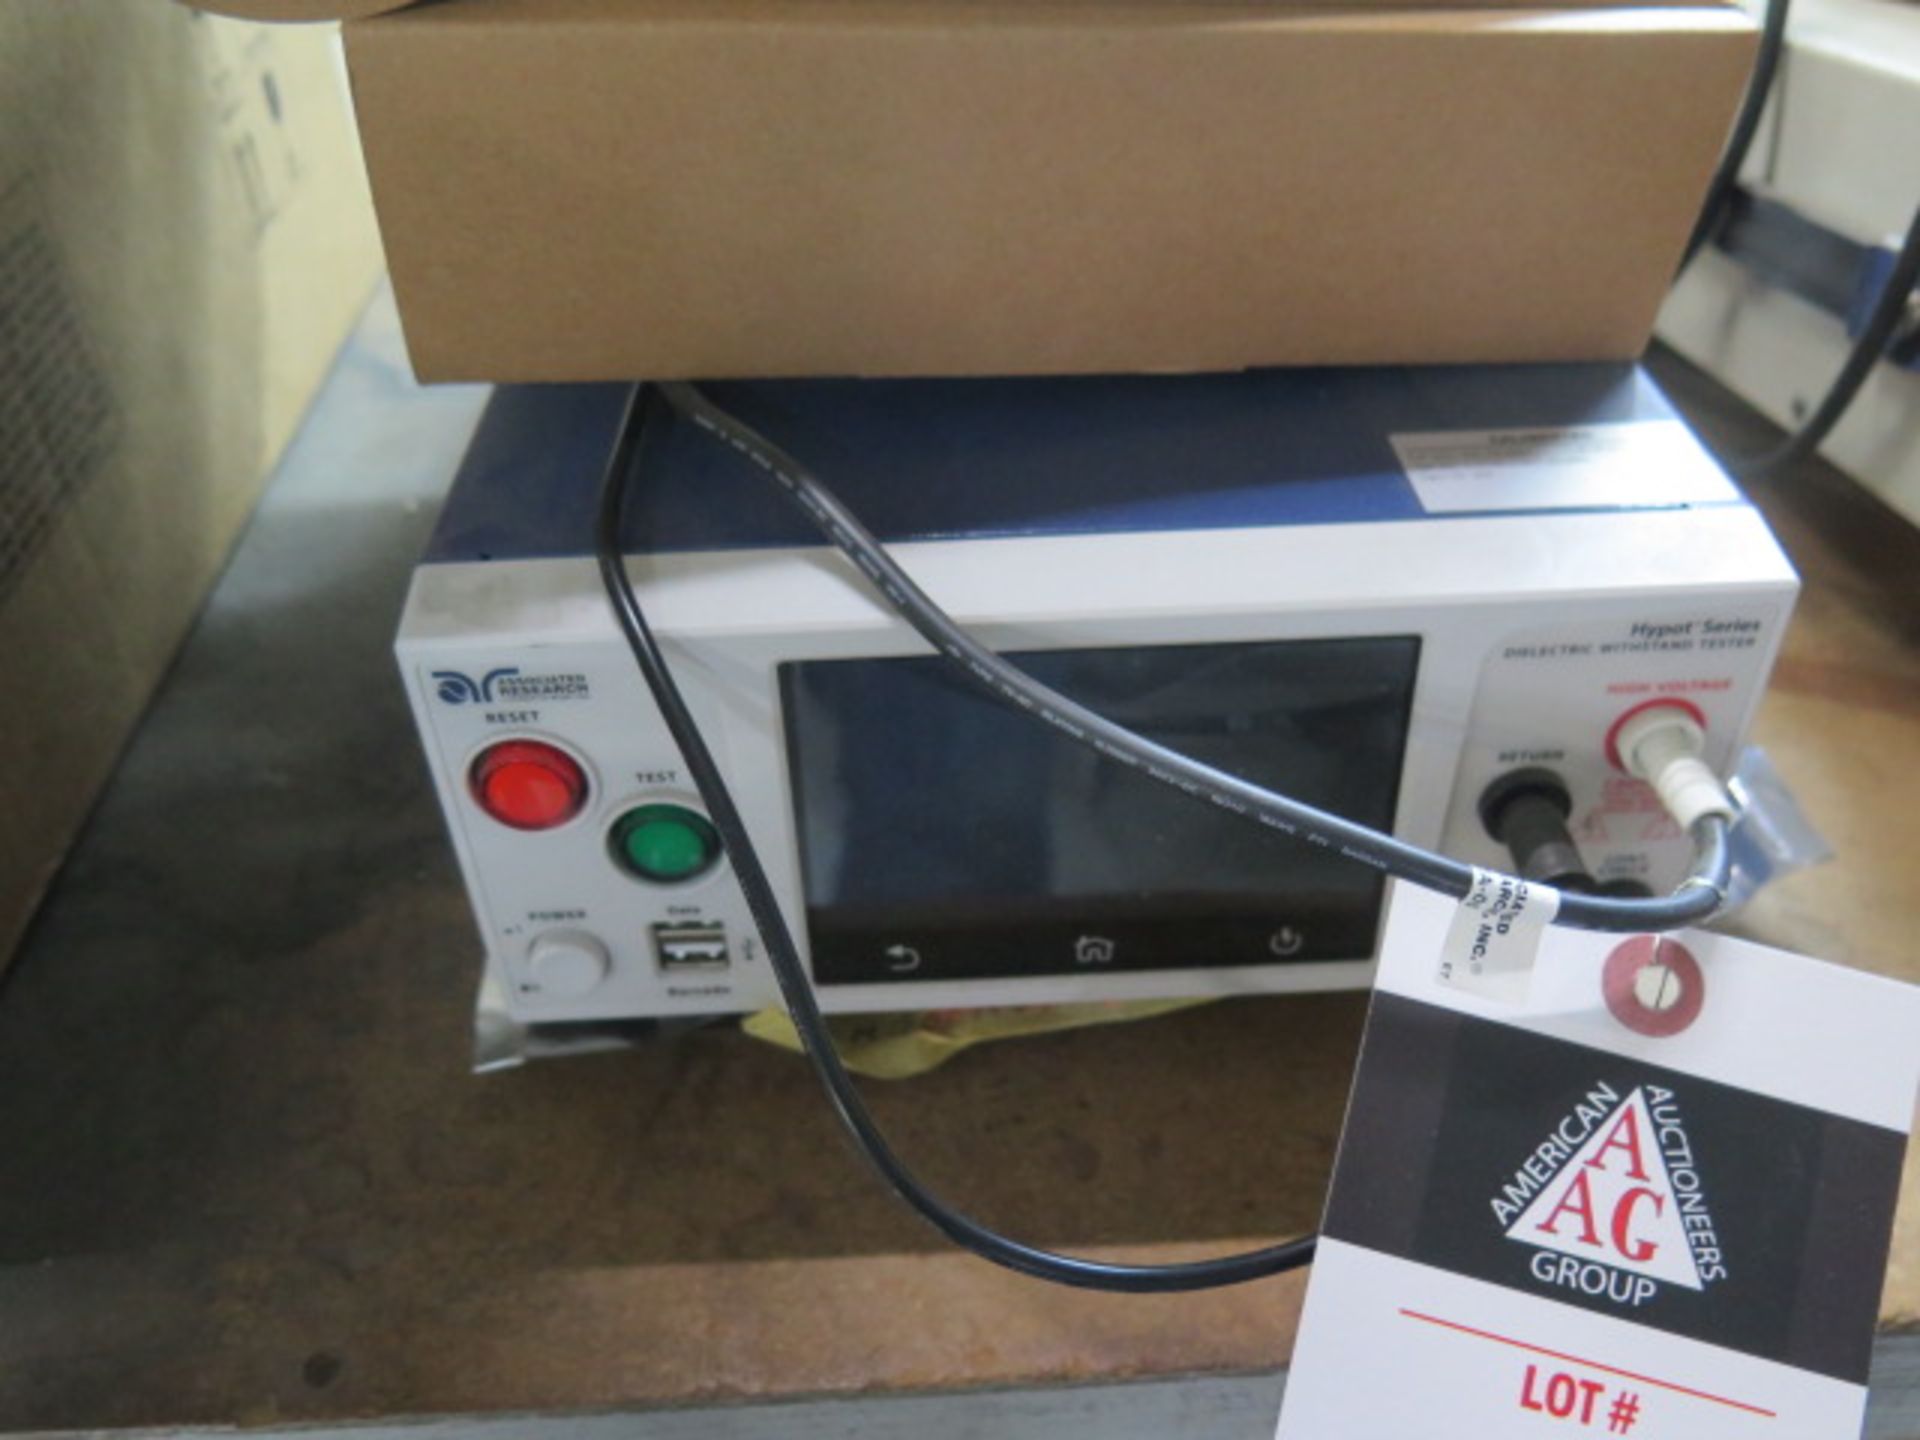 Associated Research Hypot Series Dielectric Withsdtand Tester (SOLD AS-IS - NO WARRANTY) - Image 2 of 6